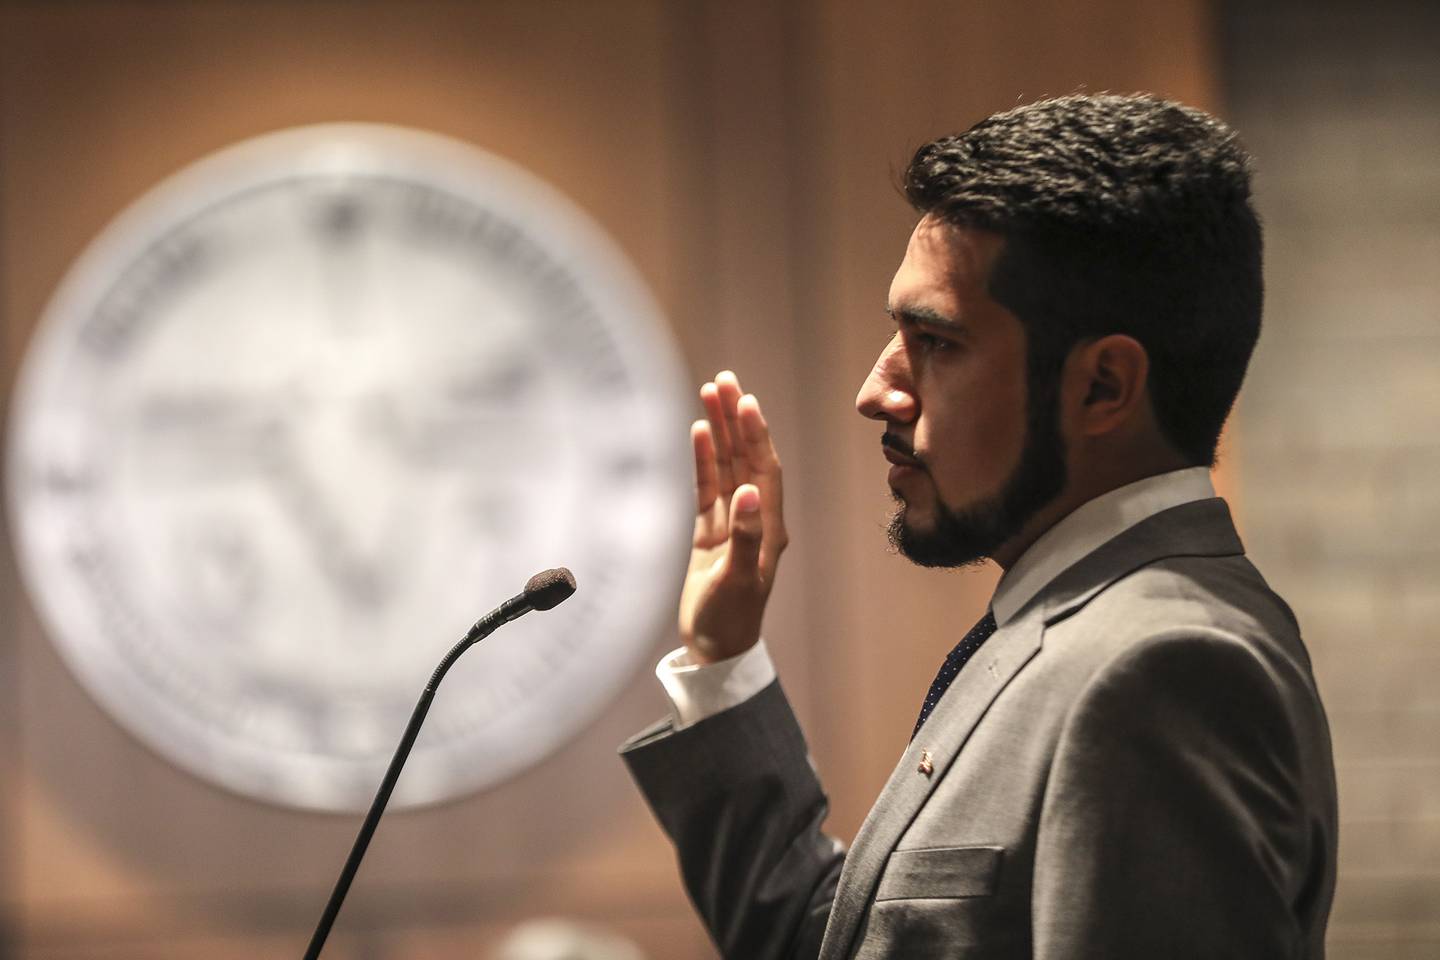 Cesar Guerrero is sworn in as a member of the Joliet City Council on Monday, May 3, 2021, at Joliet City Hall in Joliet, Ill. After a tight race, three new City Councilman were sworn in at a special meeting on Tuesday.